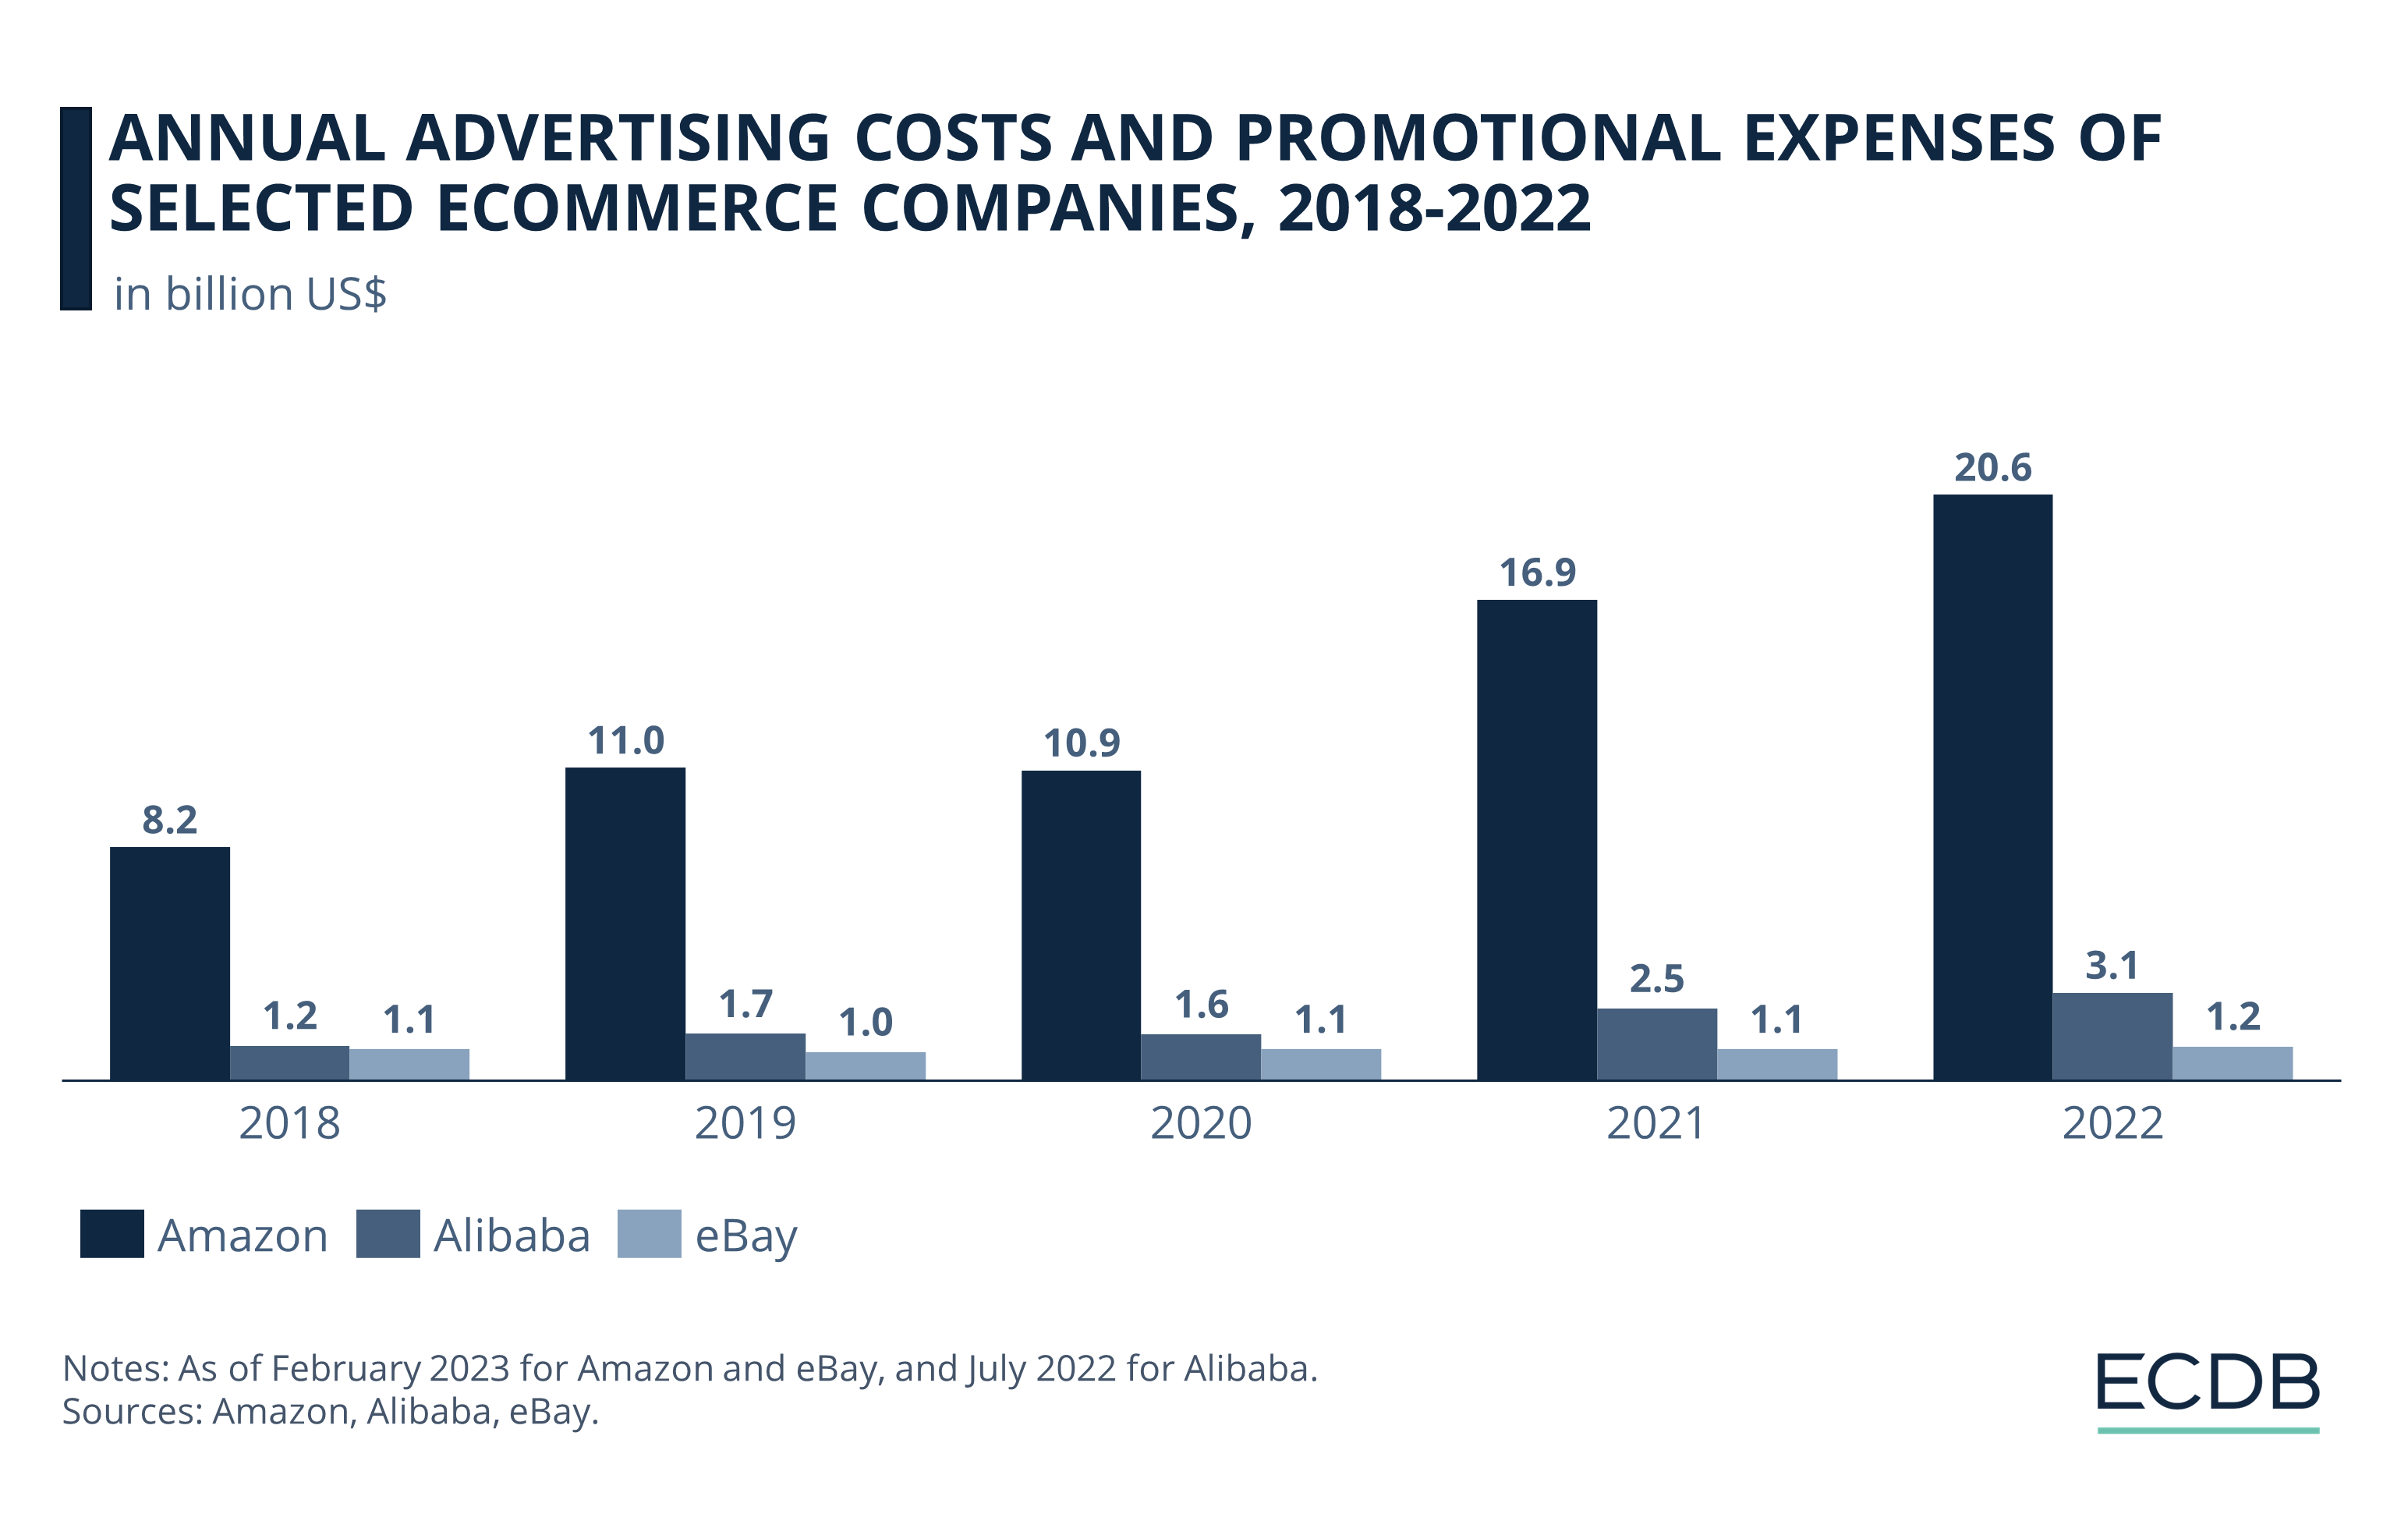 Annual Advertising Costs and Promotional Expenses of Selected eCommerce Companies, 2018-2022